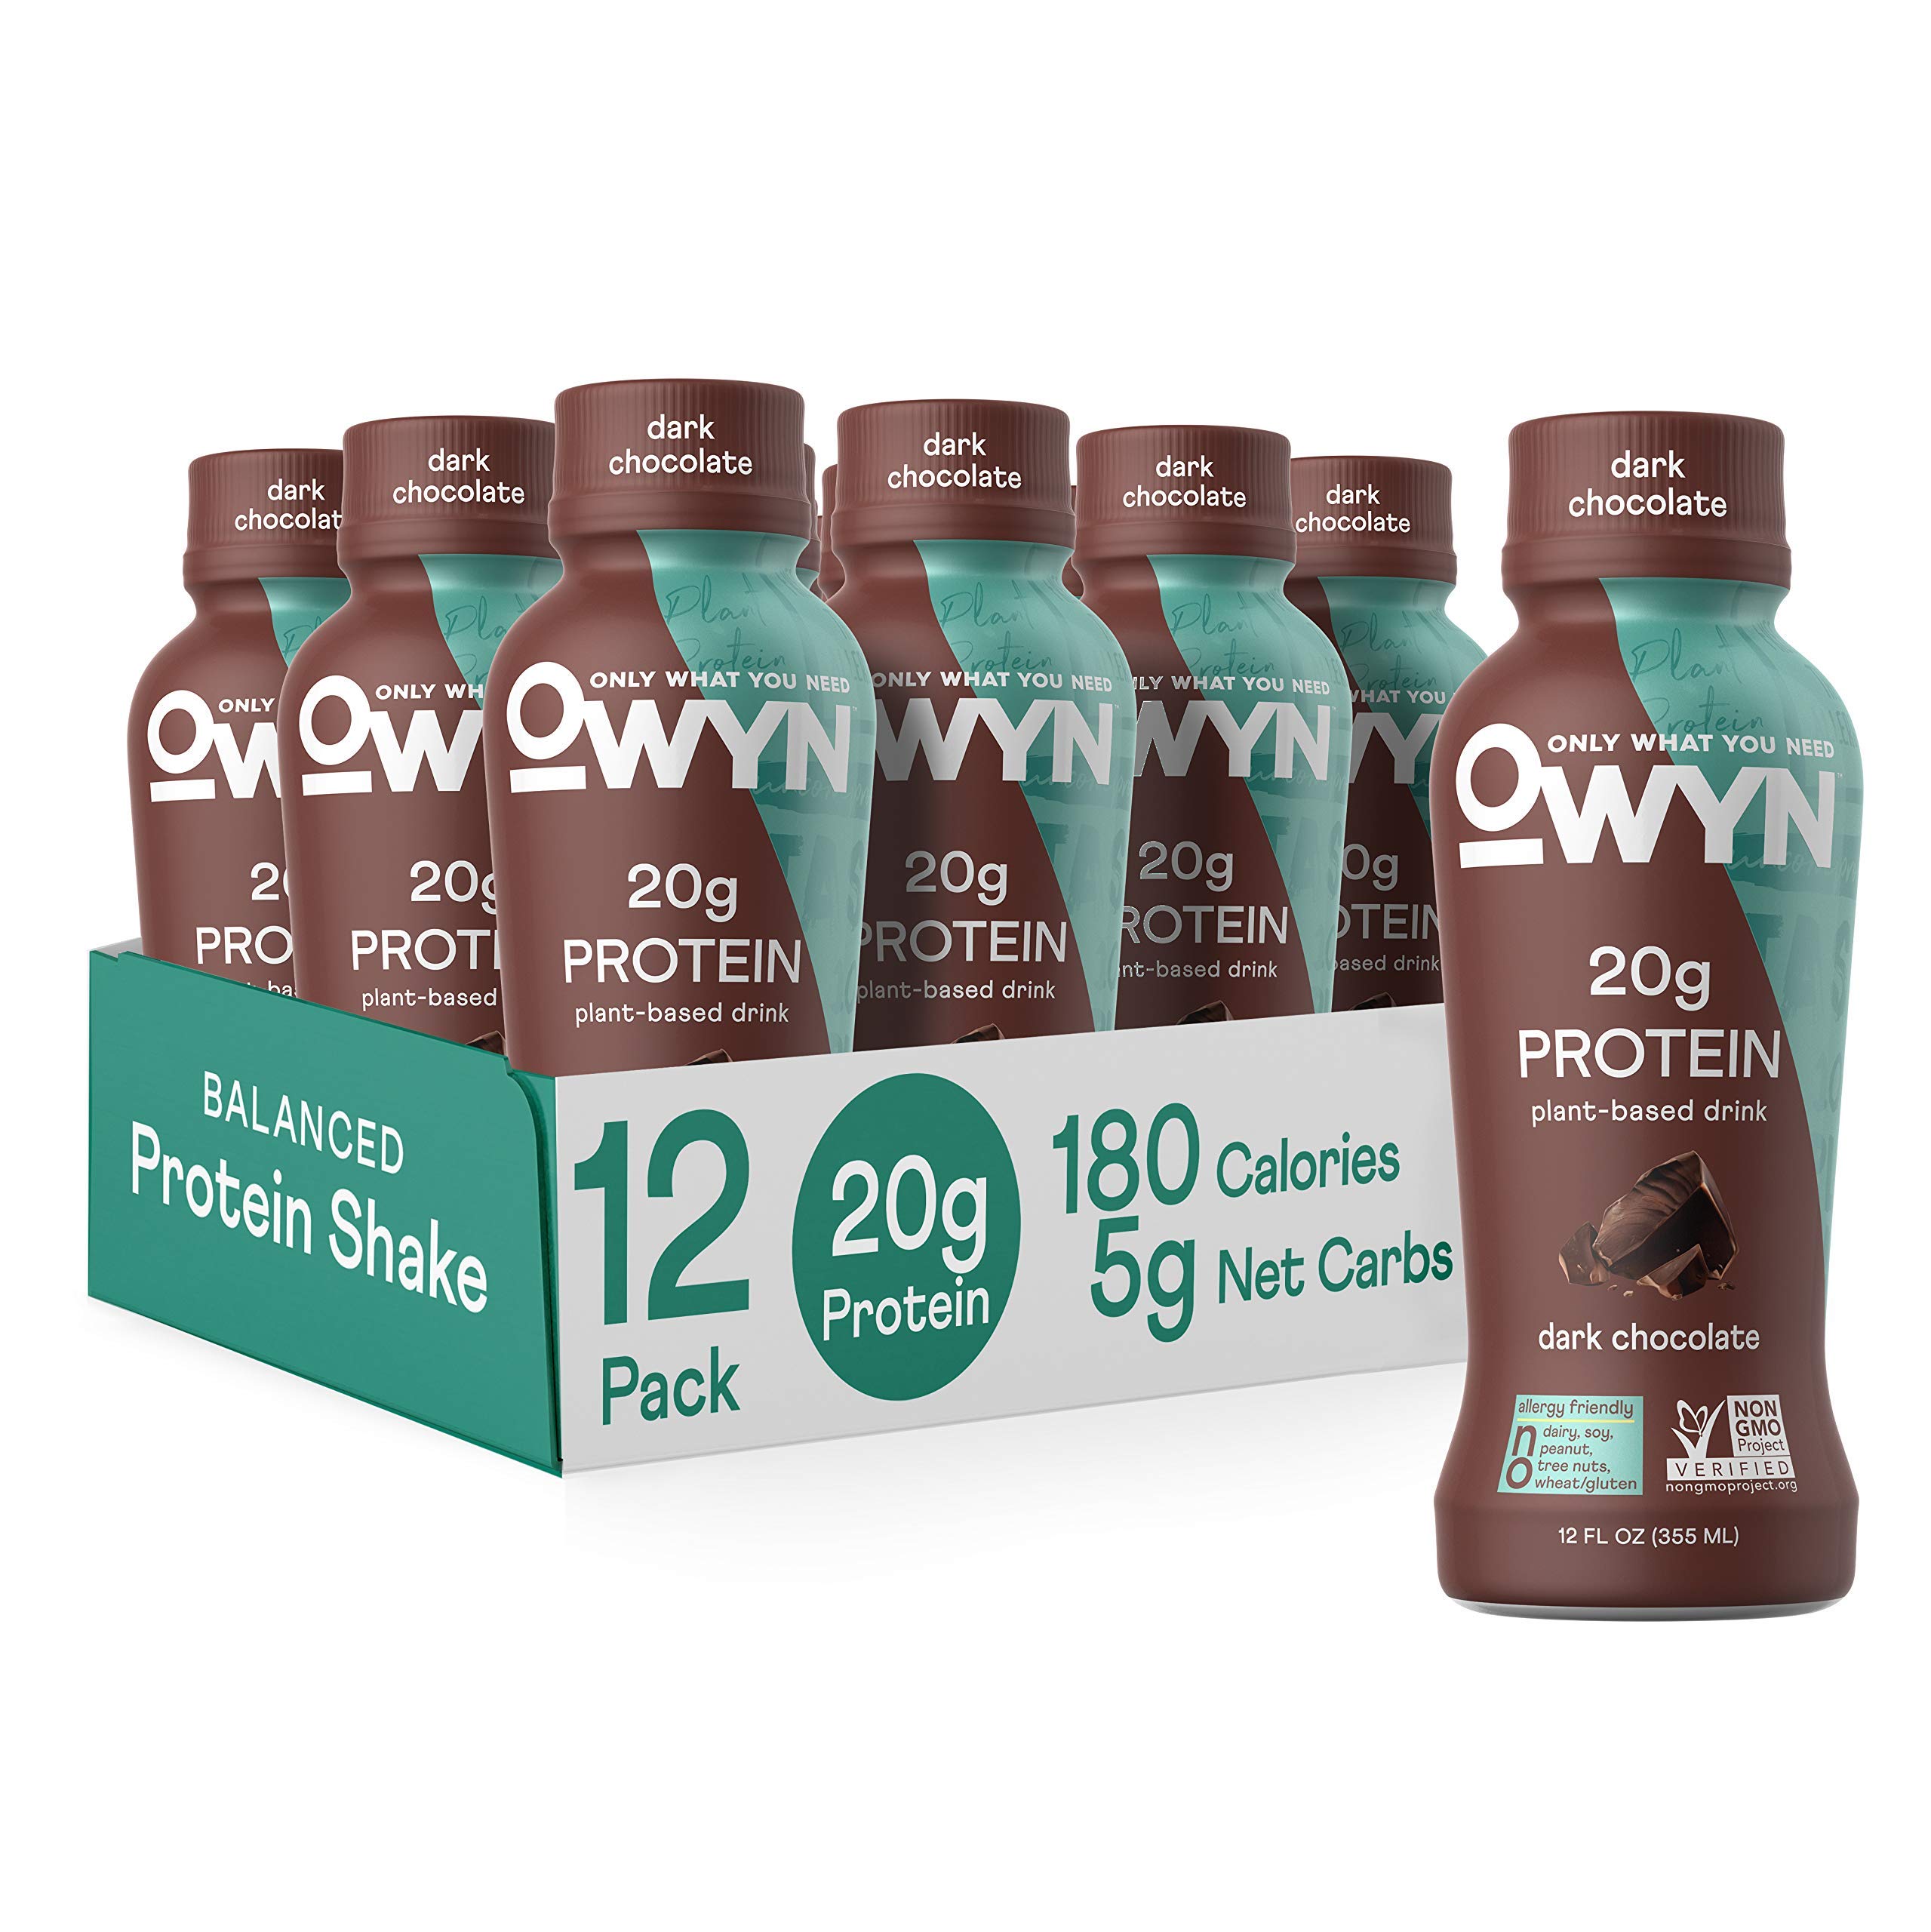 OWYN Plant Based Protein Shake, Dark Chocolate, with 20g Vegan Protein from Organic Pumpkin seed, Flax, Pea Blend, Omega-3, Prebiotic supplements a...